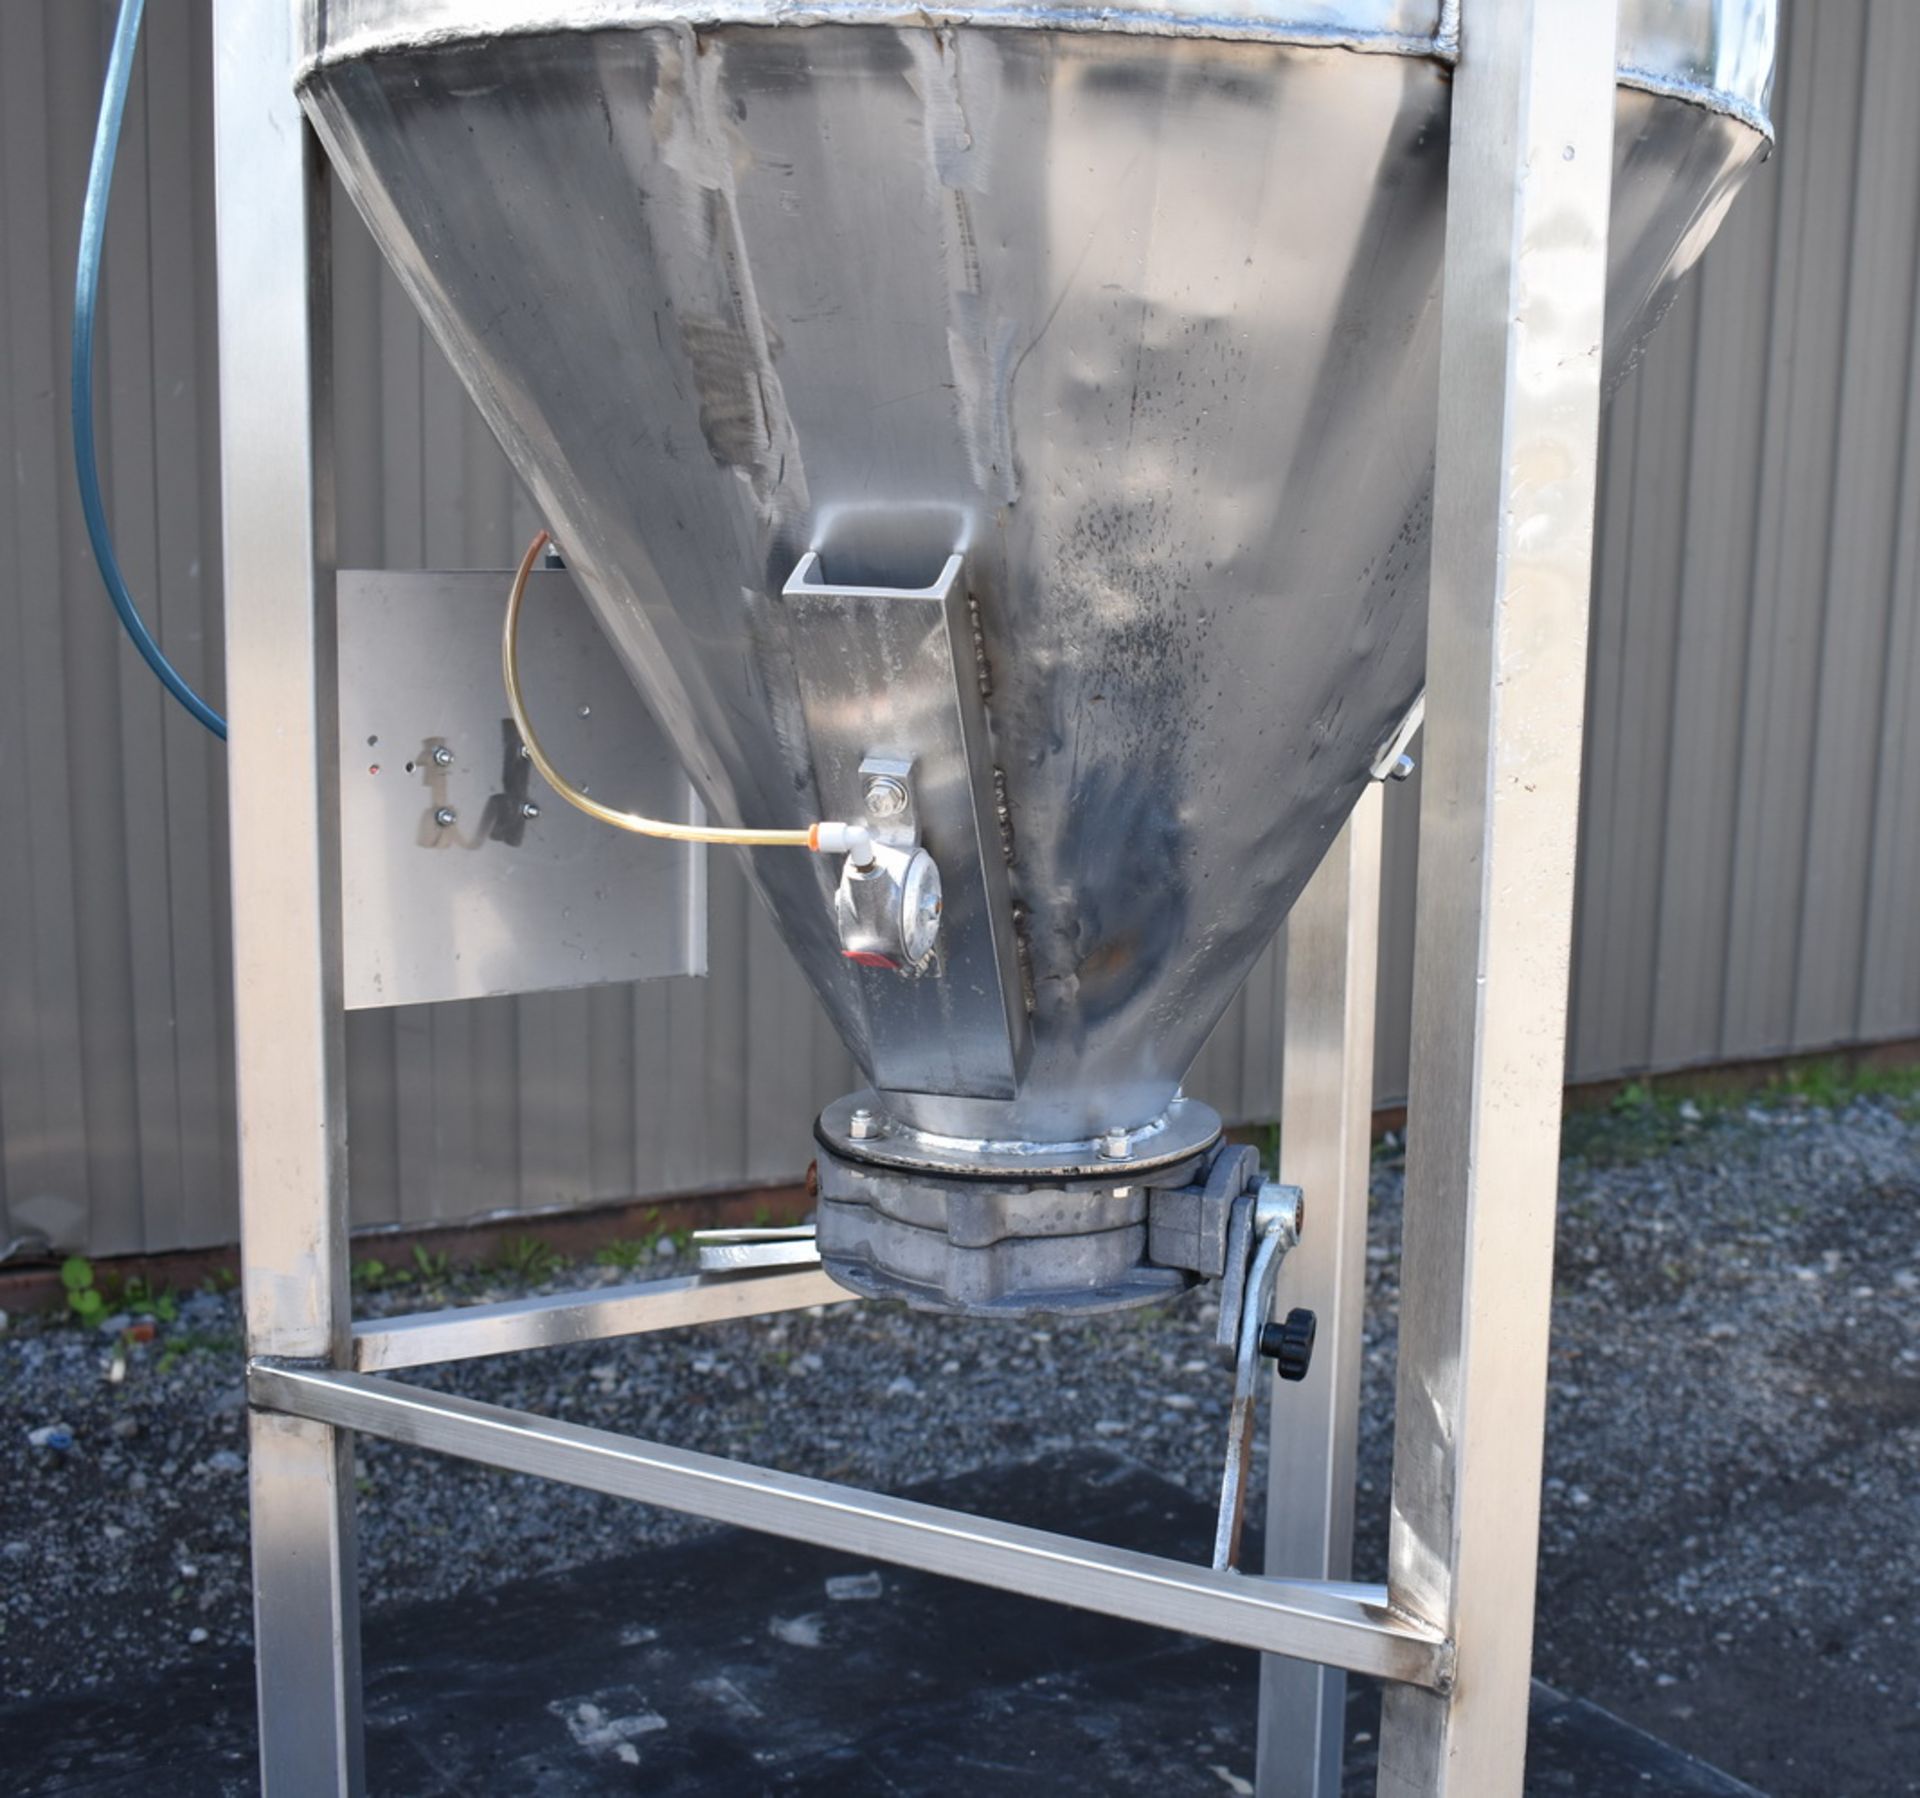 WAM FC3A 200 STAINLESS STEEL DUST COLLECTOR Item Location : Laval  -MANUFACTURER:  WAM - Image 8 of 18